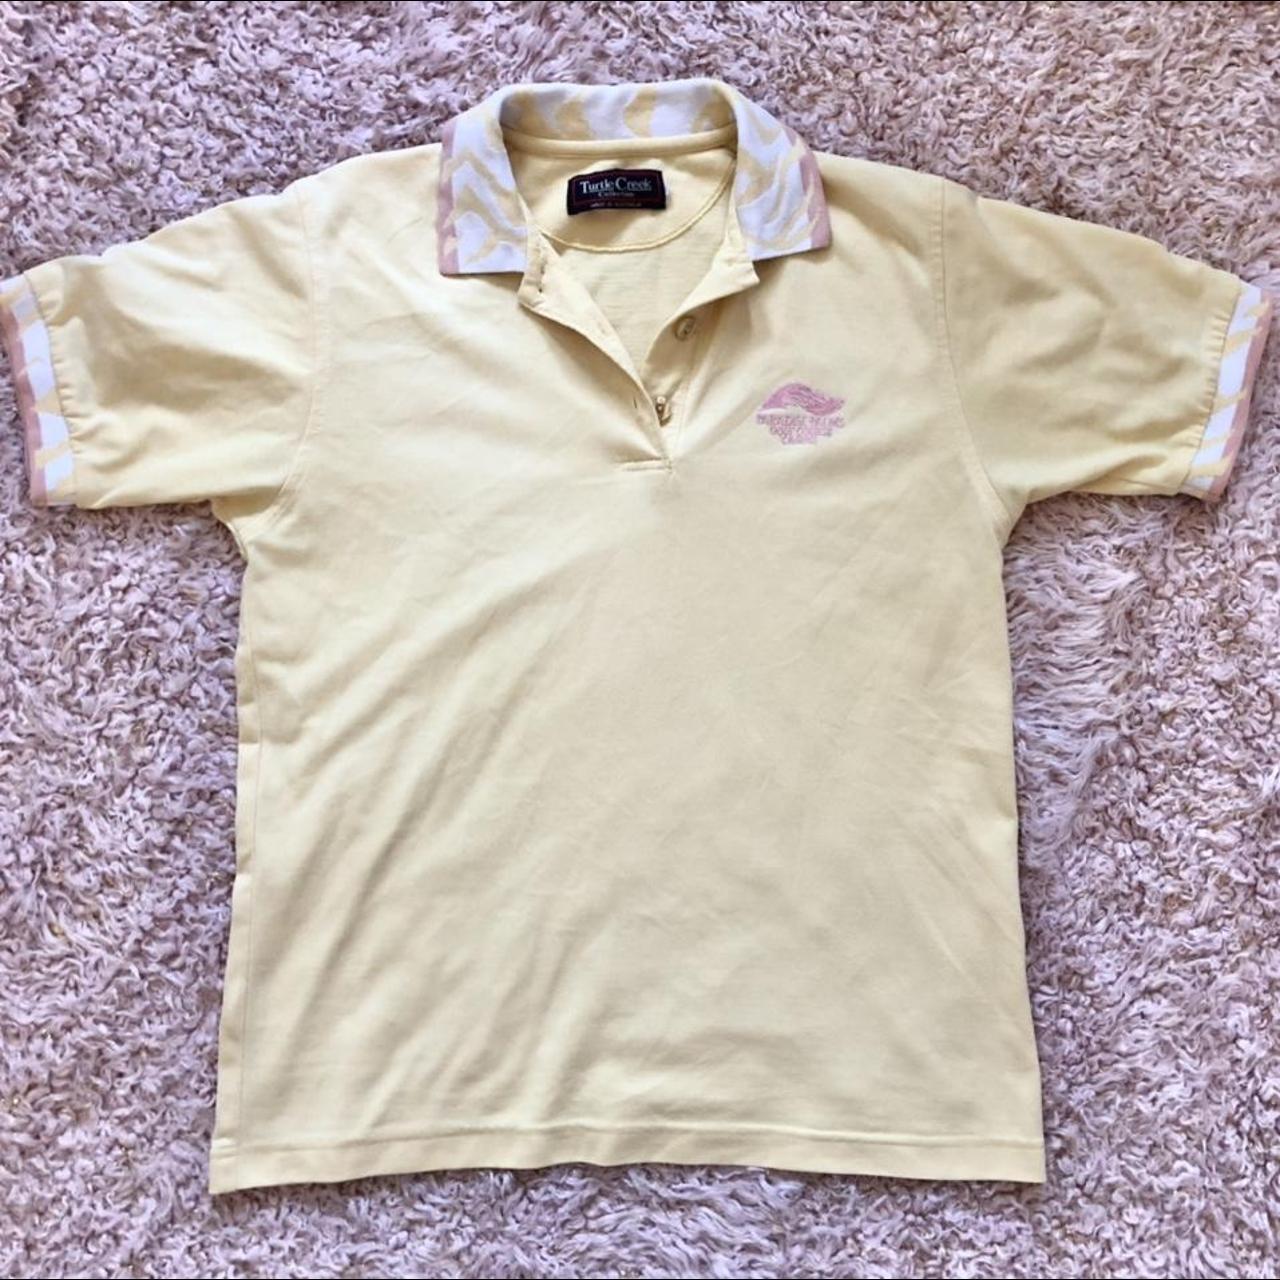 Vintage yellow polo shirt with pink and white... - Depop